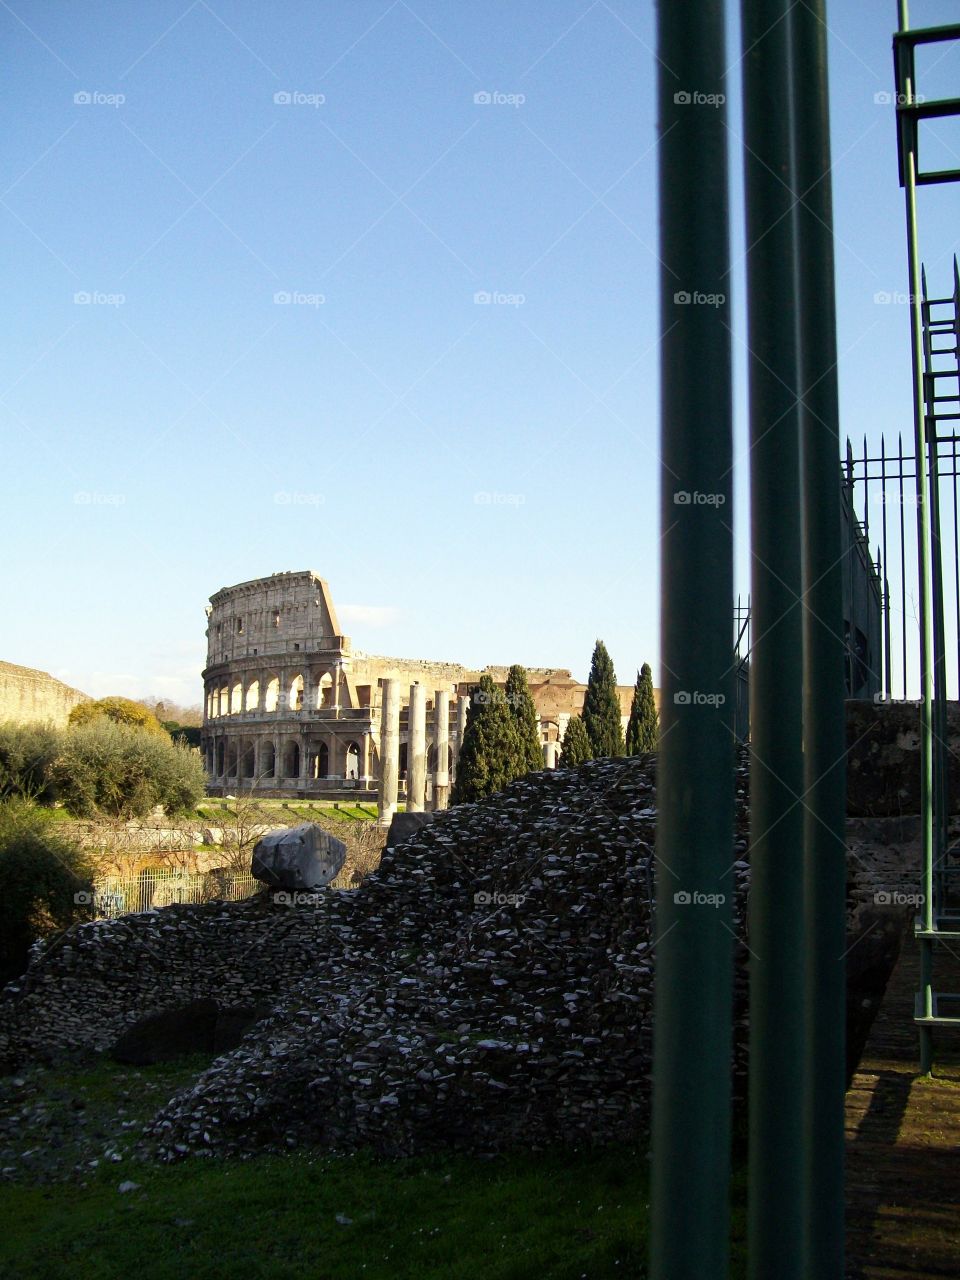 A glimpse of the Roman Coliseum bathed in light juxtaposed with the metal gates in the foreground 